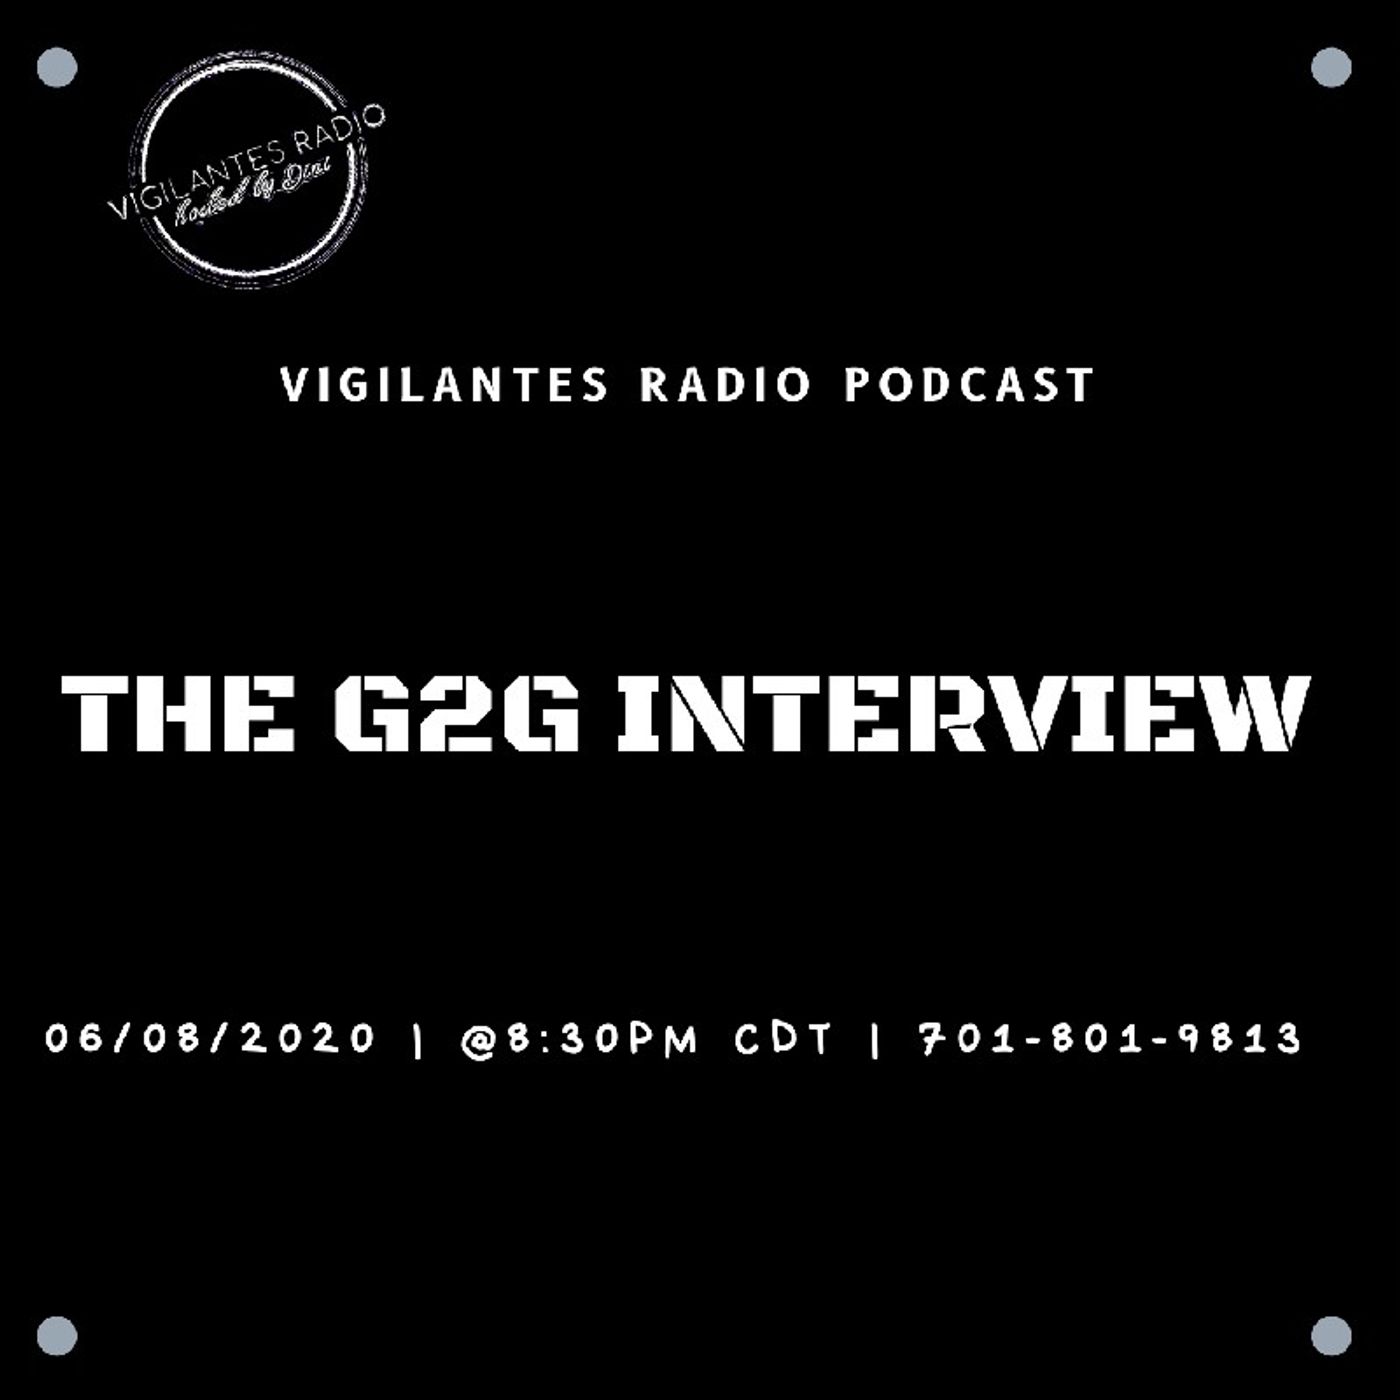 The G2G Interview. Image